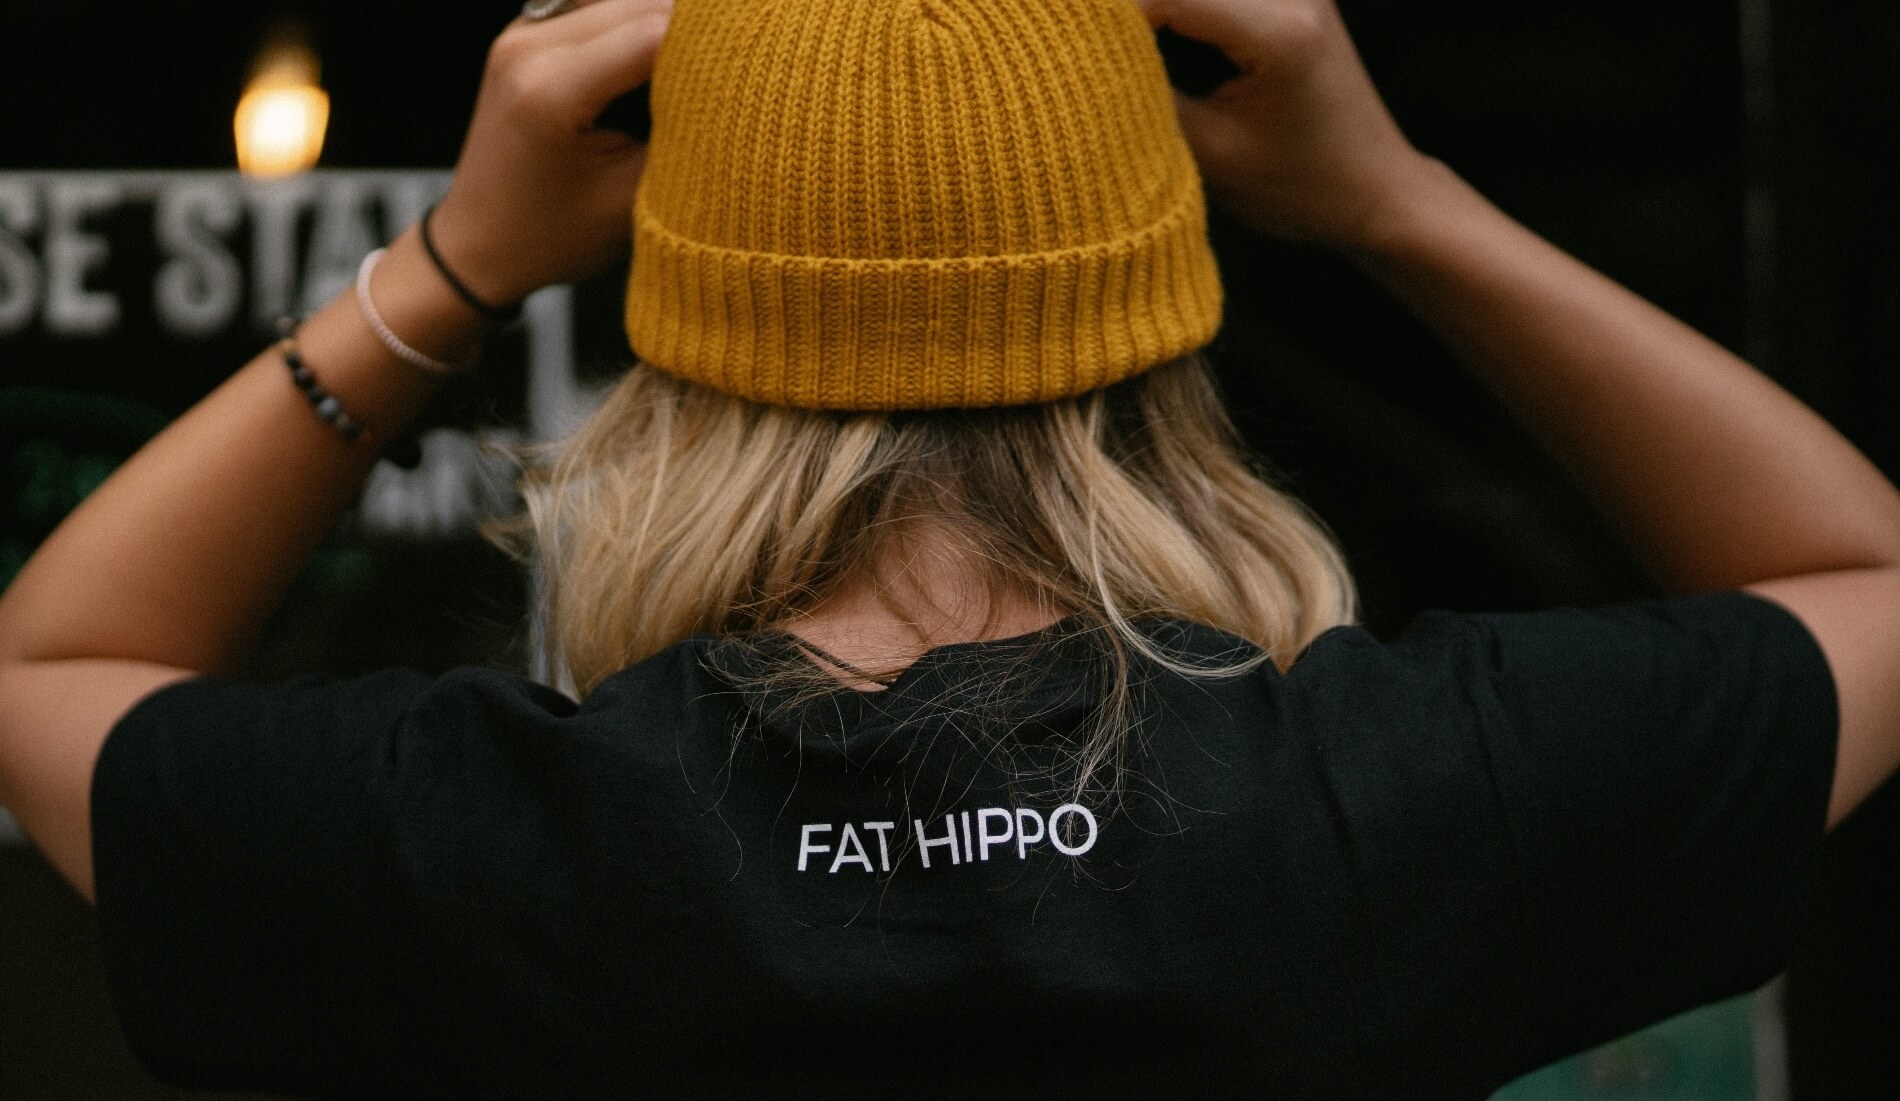 Fat Hippo Merch Available